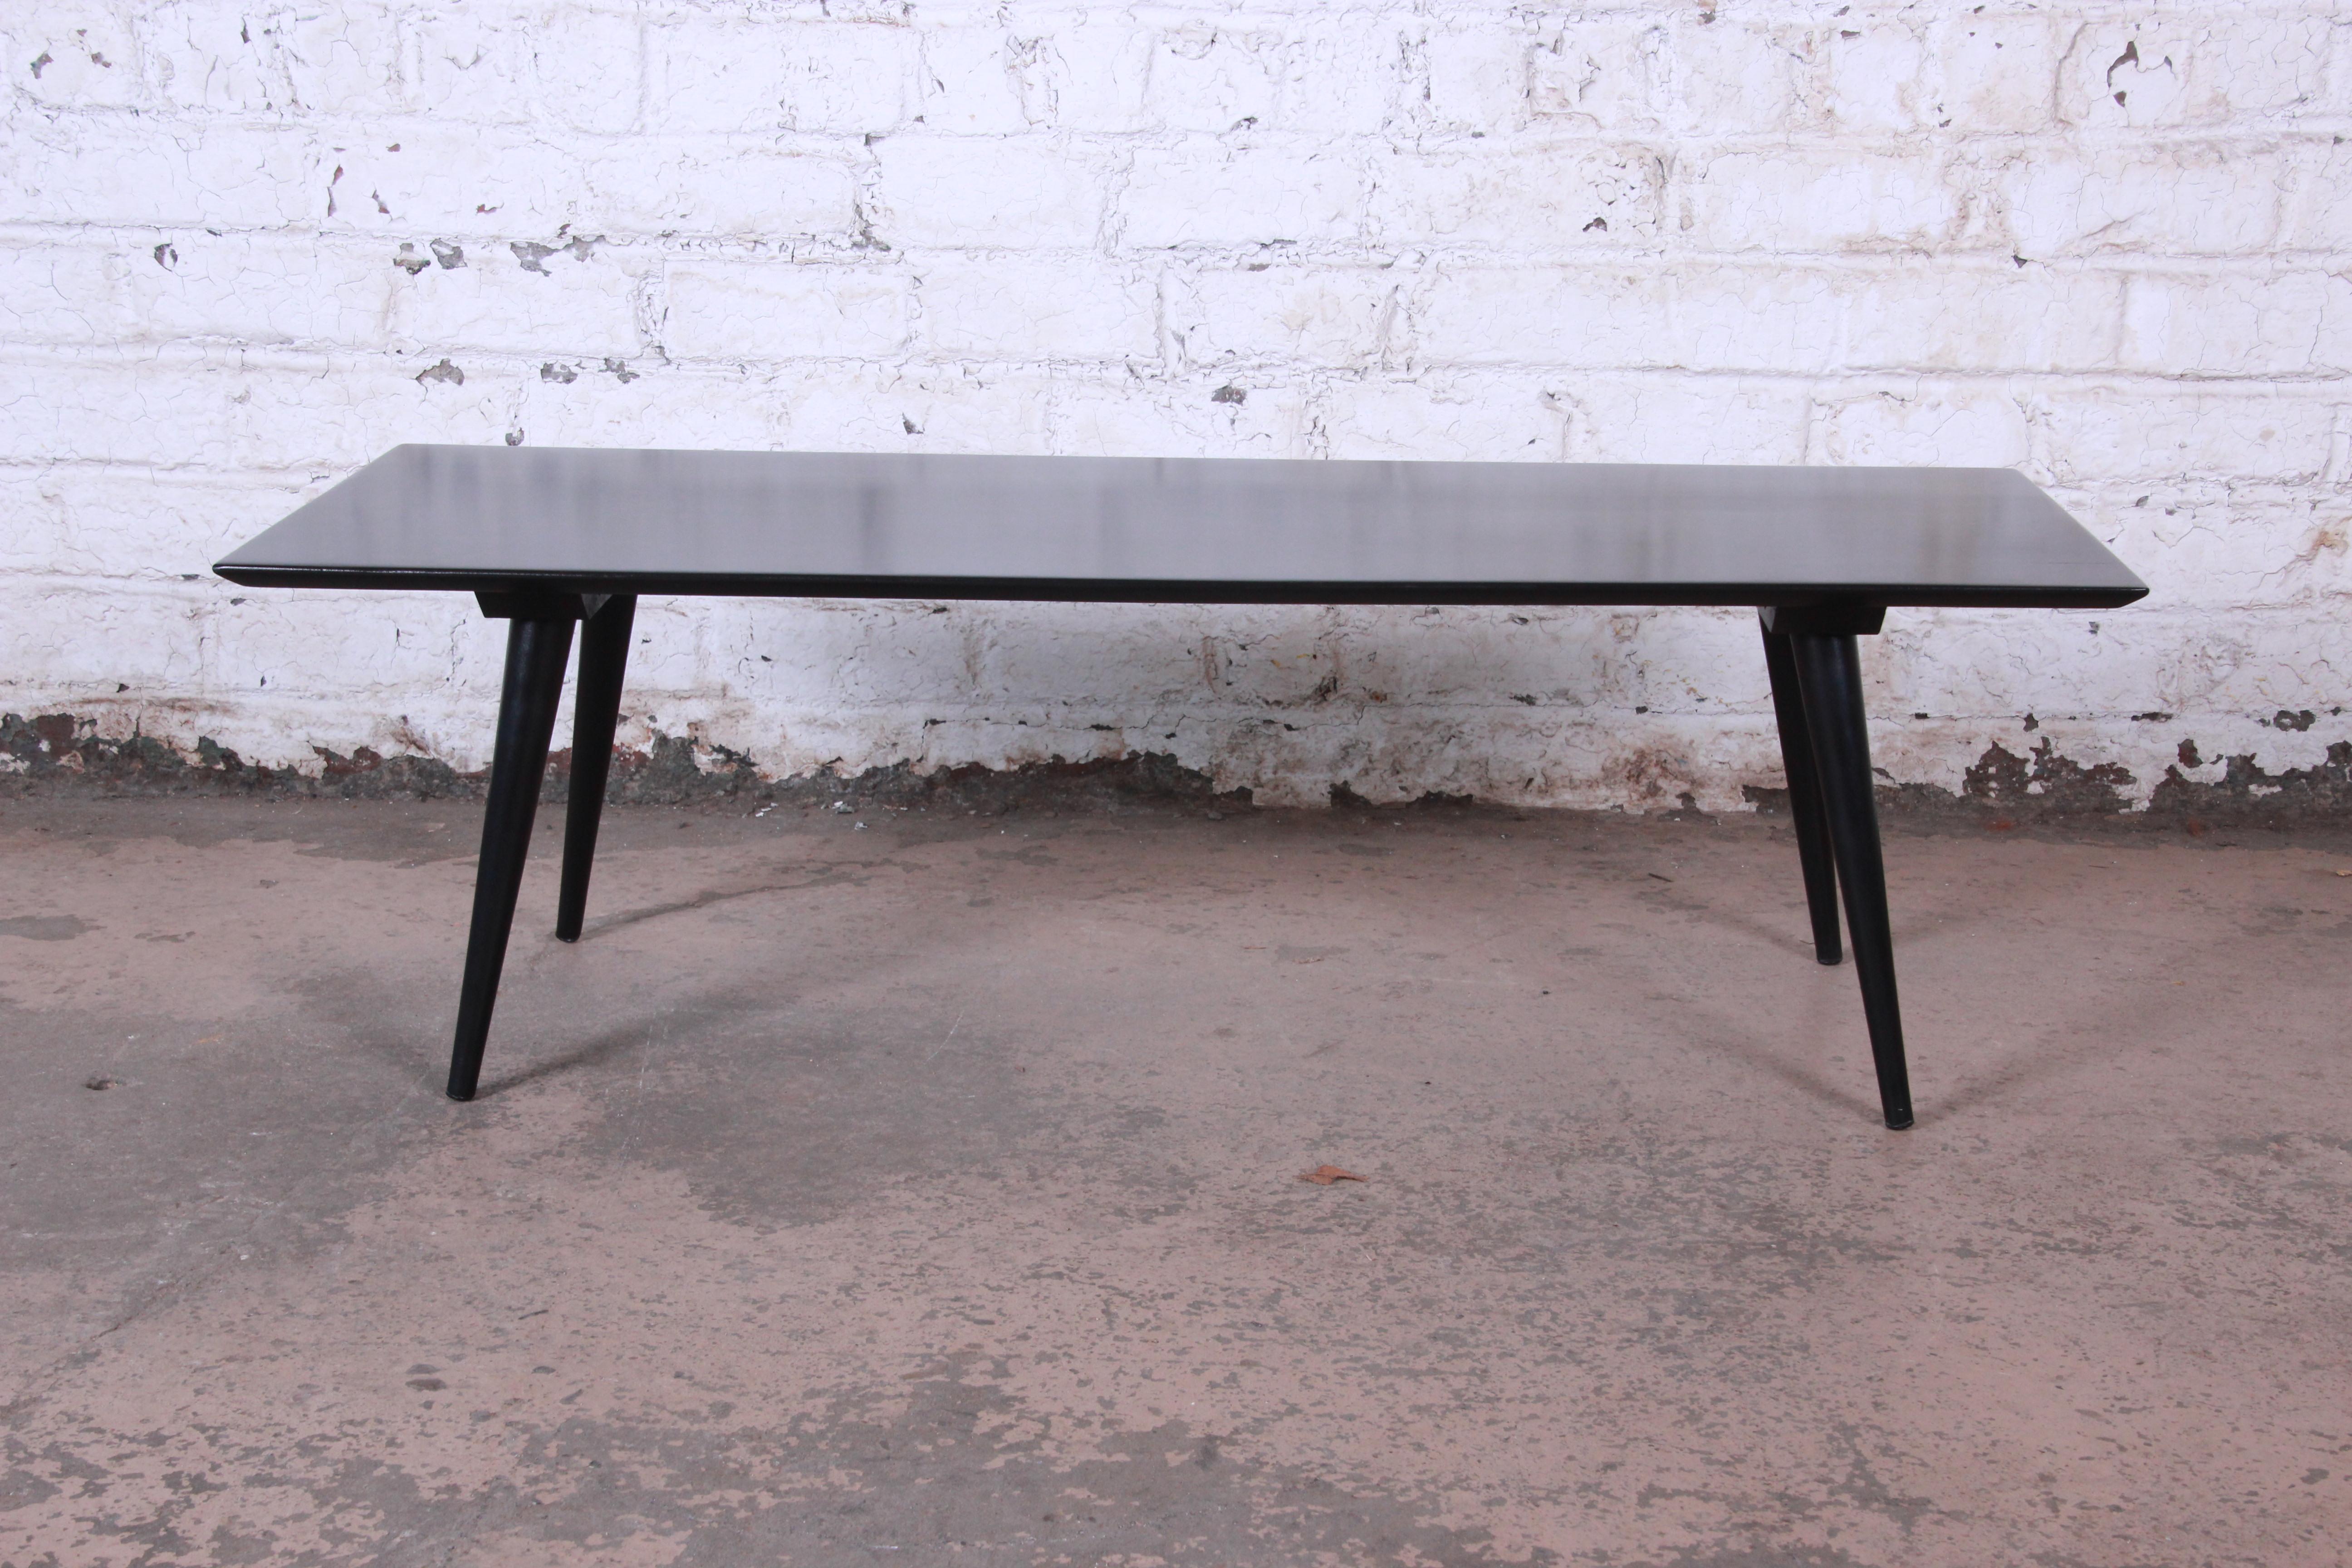 A sleek and stylish Mid-Century Modern coffee table designed by Paul McCobb for his Planner Group line for Winchendon Furniture. The table features solid birch construction with a black lacquered finish and nice tall tapered legs. An excellent